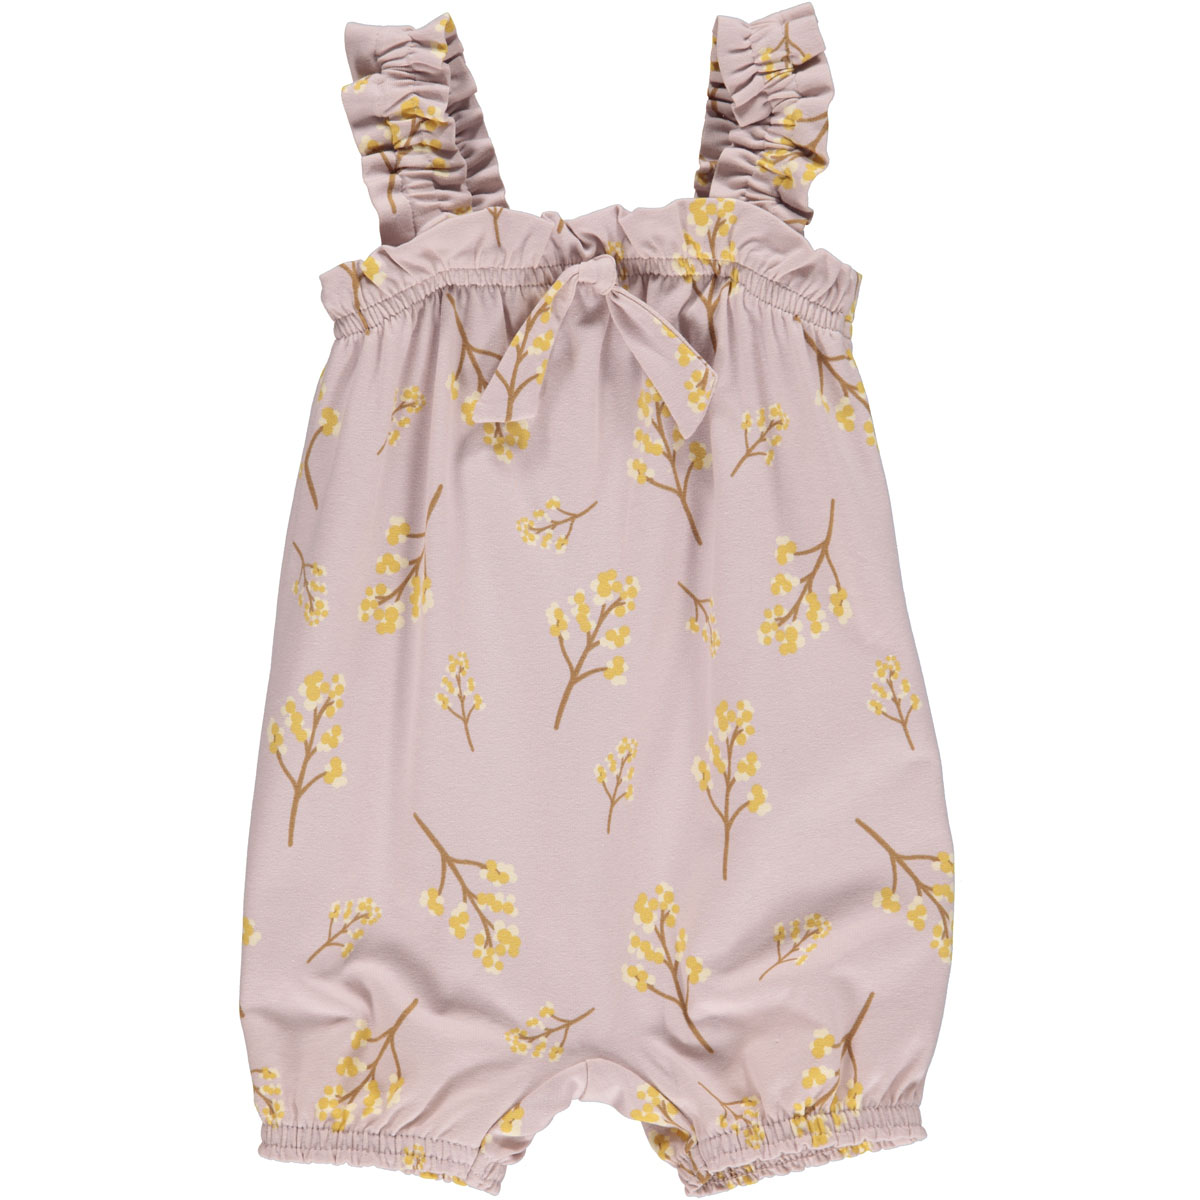 MAMA.LICIOUS Baby one-piece suit - 1583043500